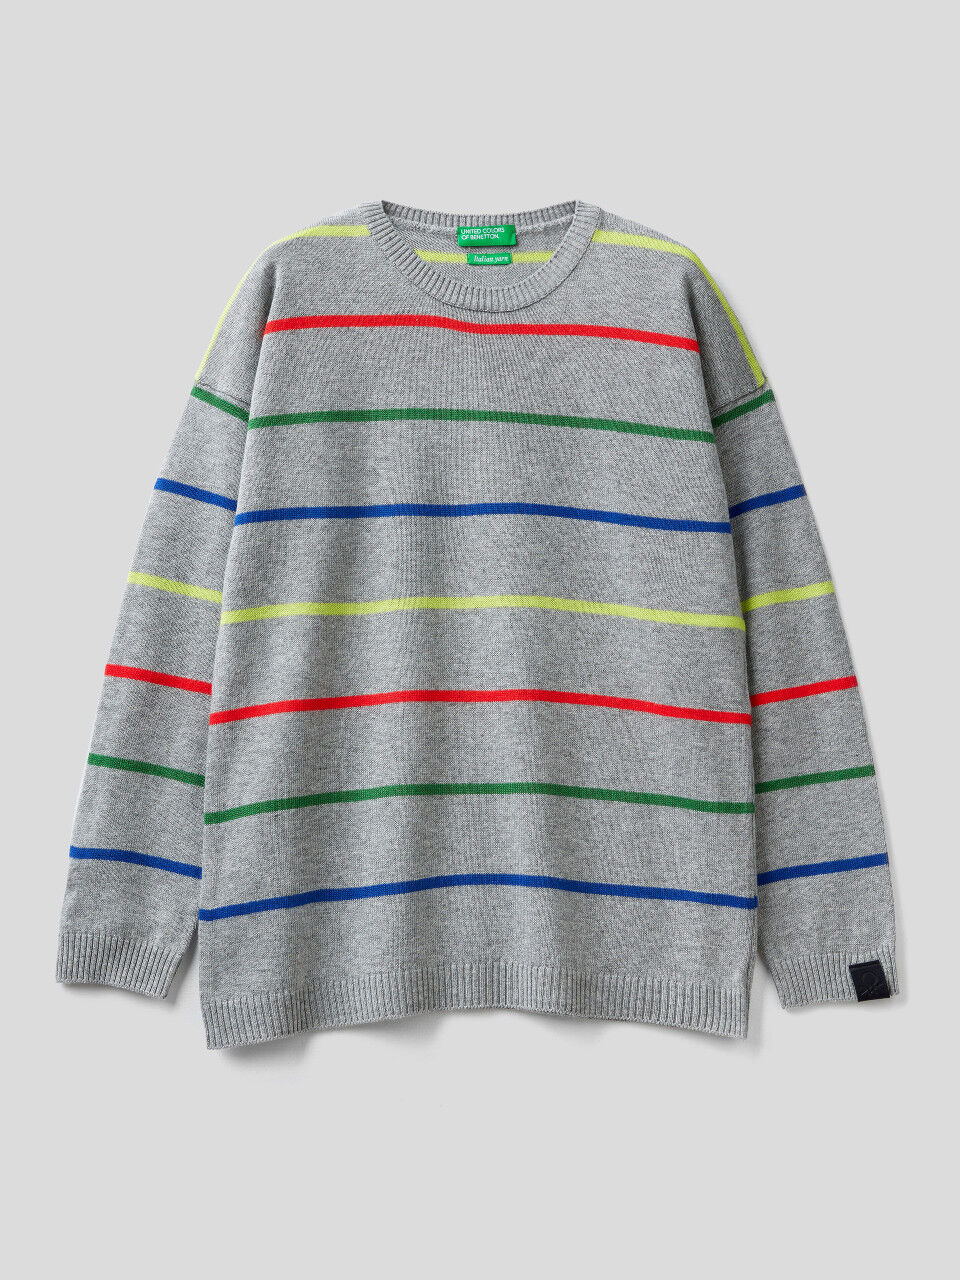 Striped sweater in wool and cotton blend